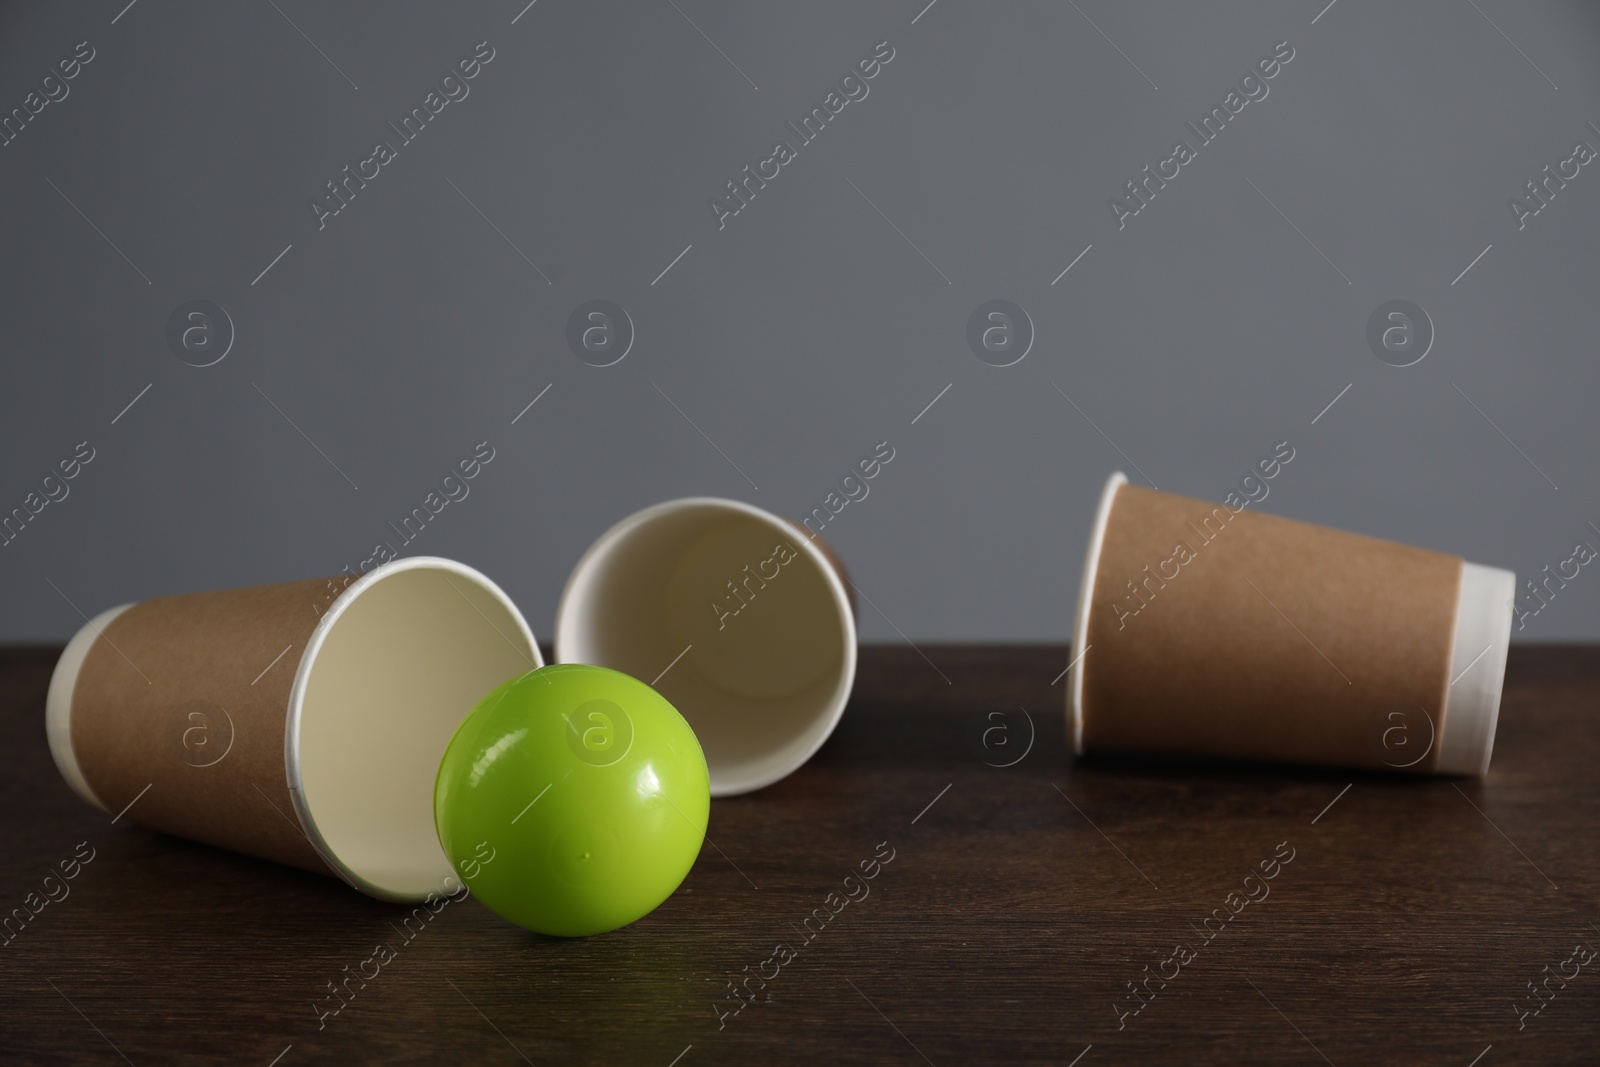 Photo of Shell game. Three paper cups and ball on wooden table